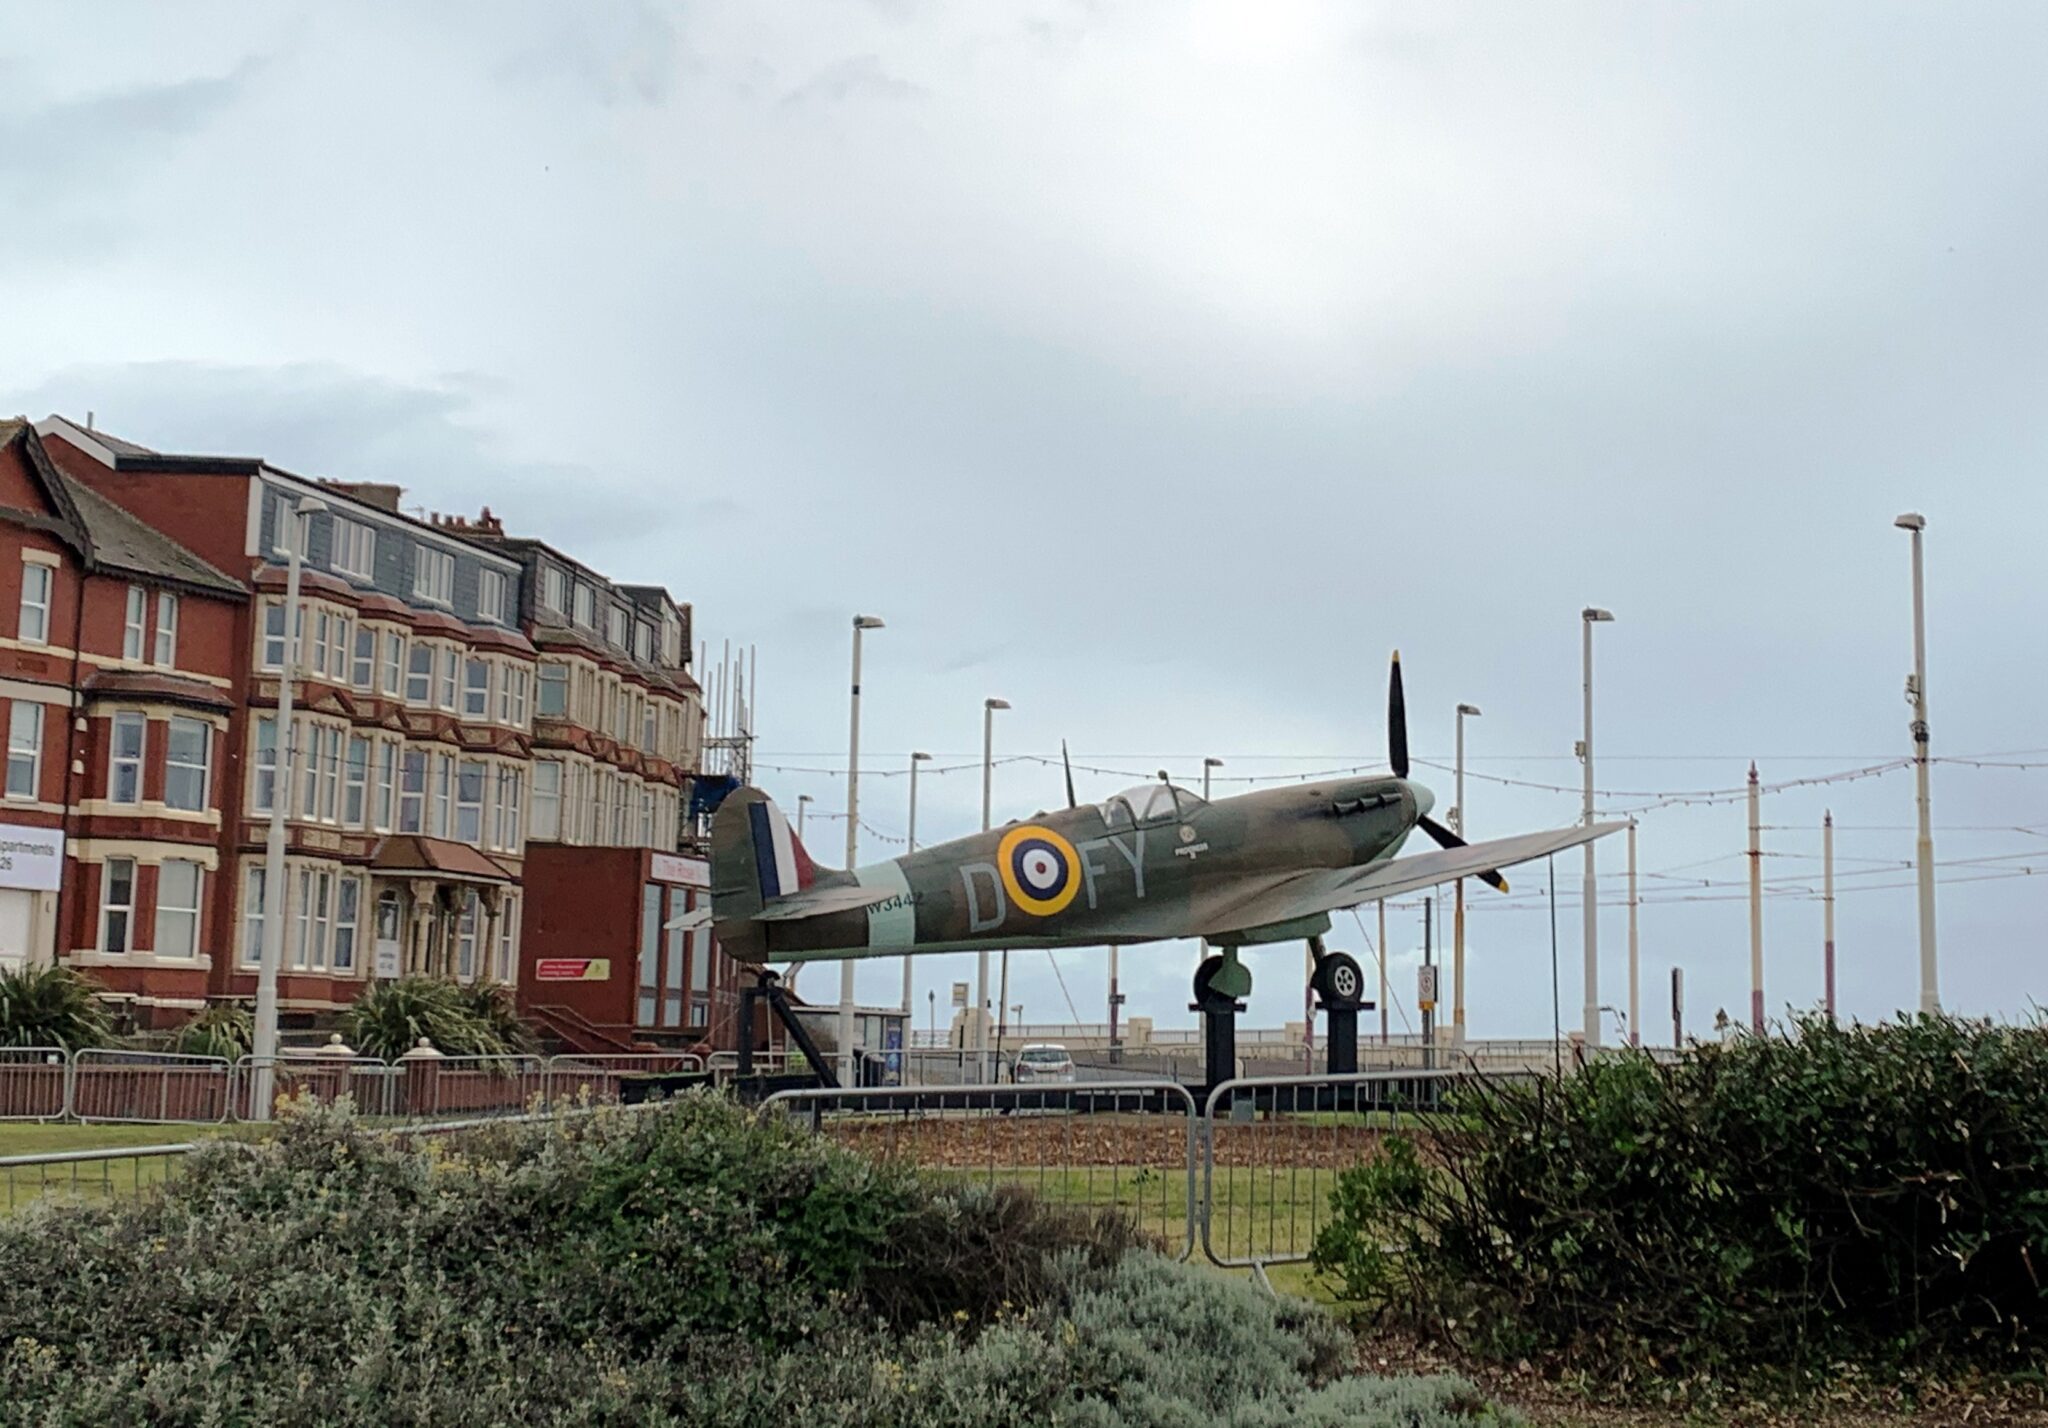 Spitfire at Gynn Roundabout in 2020